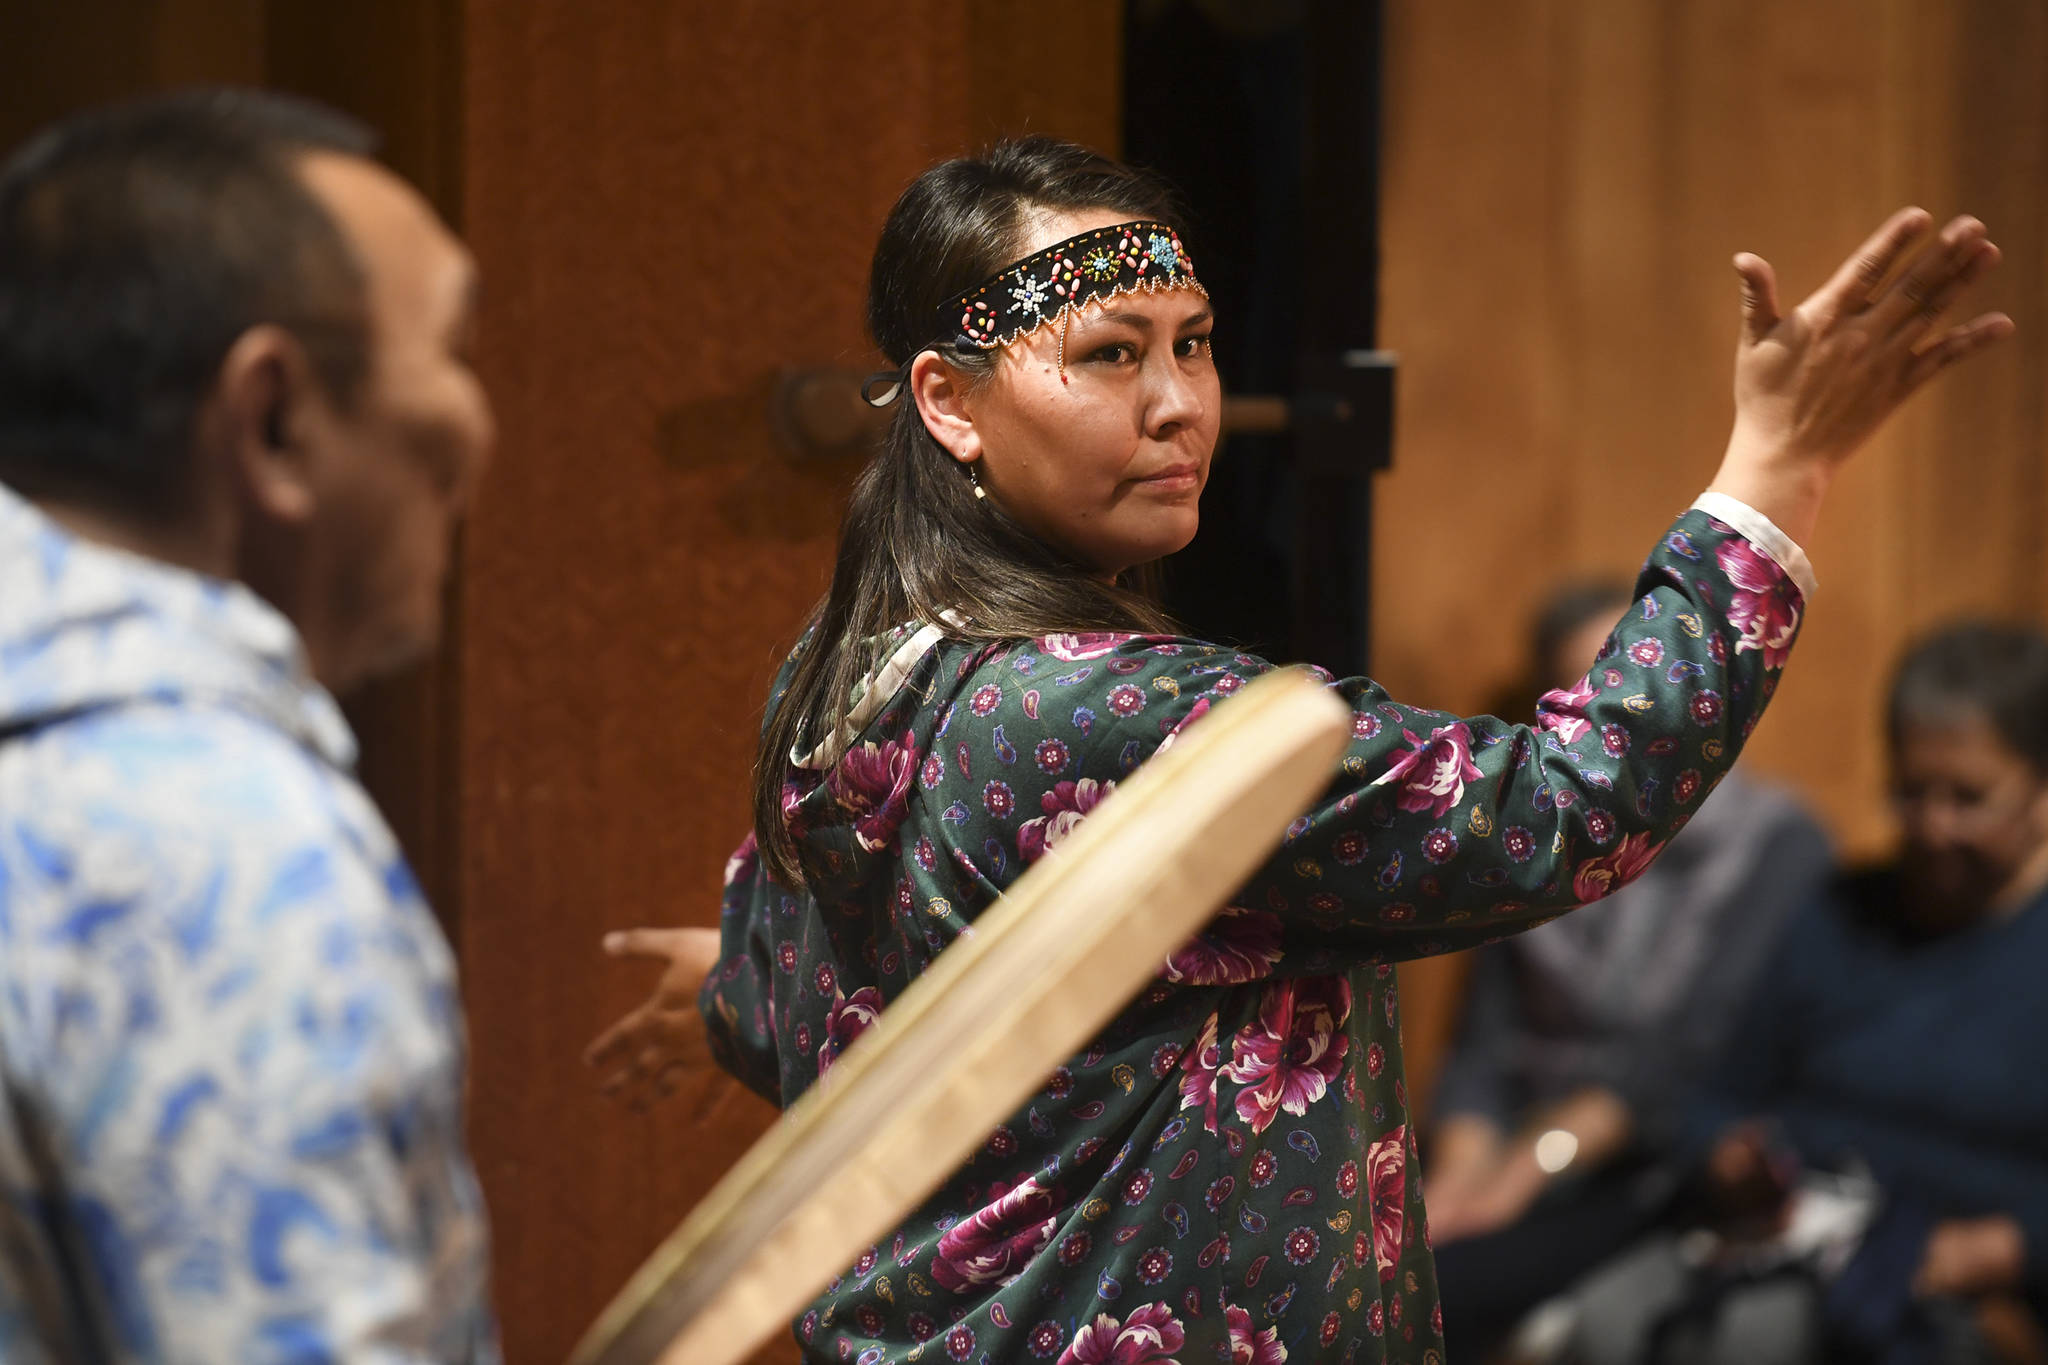 Rene Mokiyuk, right, performs St. Lawrence Island dancing and song with her uncle, John Waghiyi and his wife, Arlene Annogiyuk Waghiyi, of Savoonga, at the Walter Soboleff Center on Wednesday, Aug. 28, 2019. (Michael Penn | Juneau Empire)